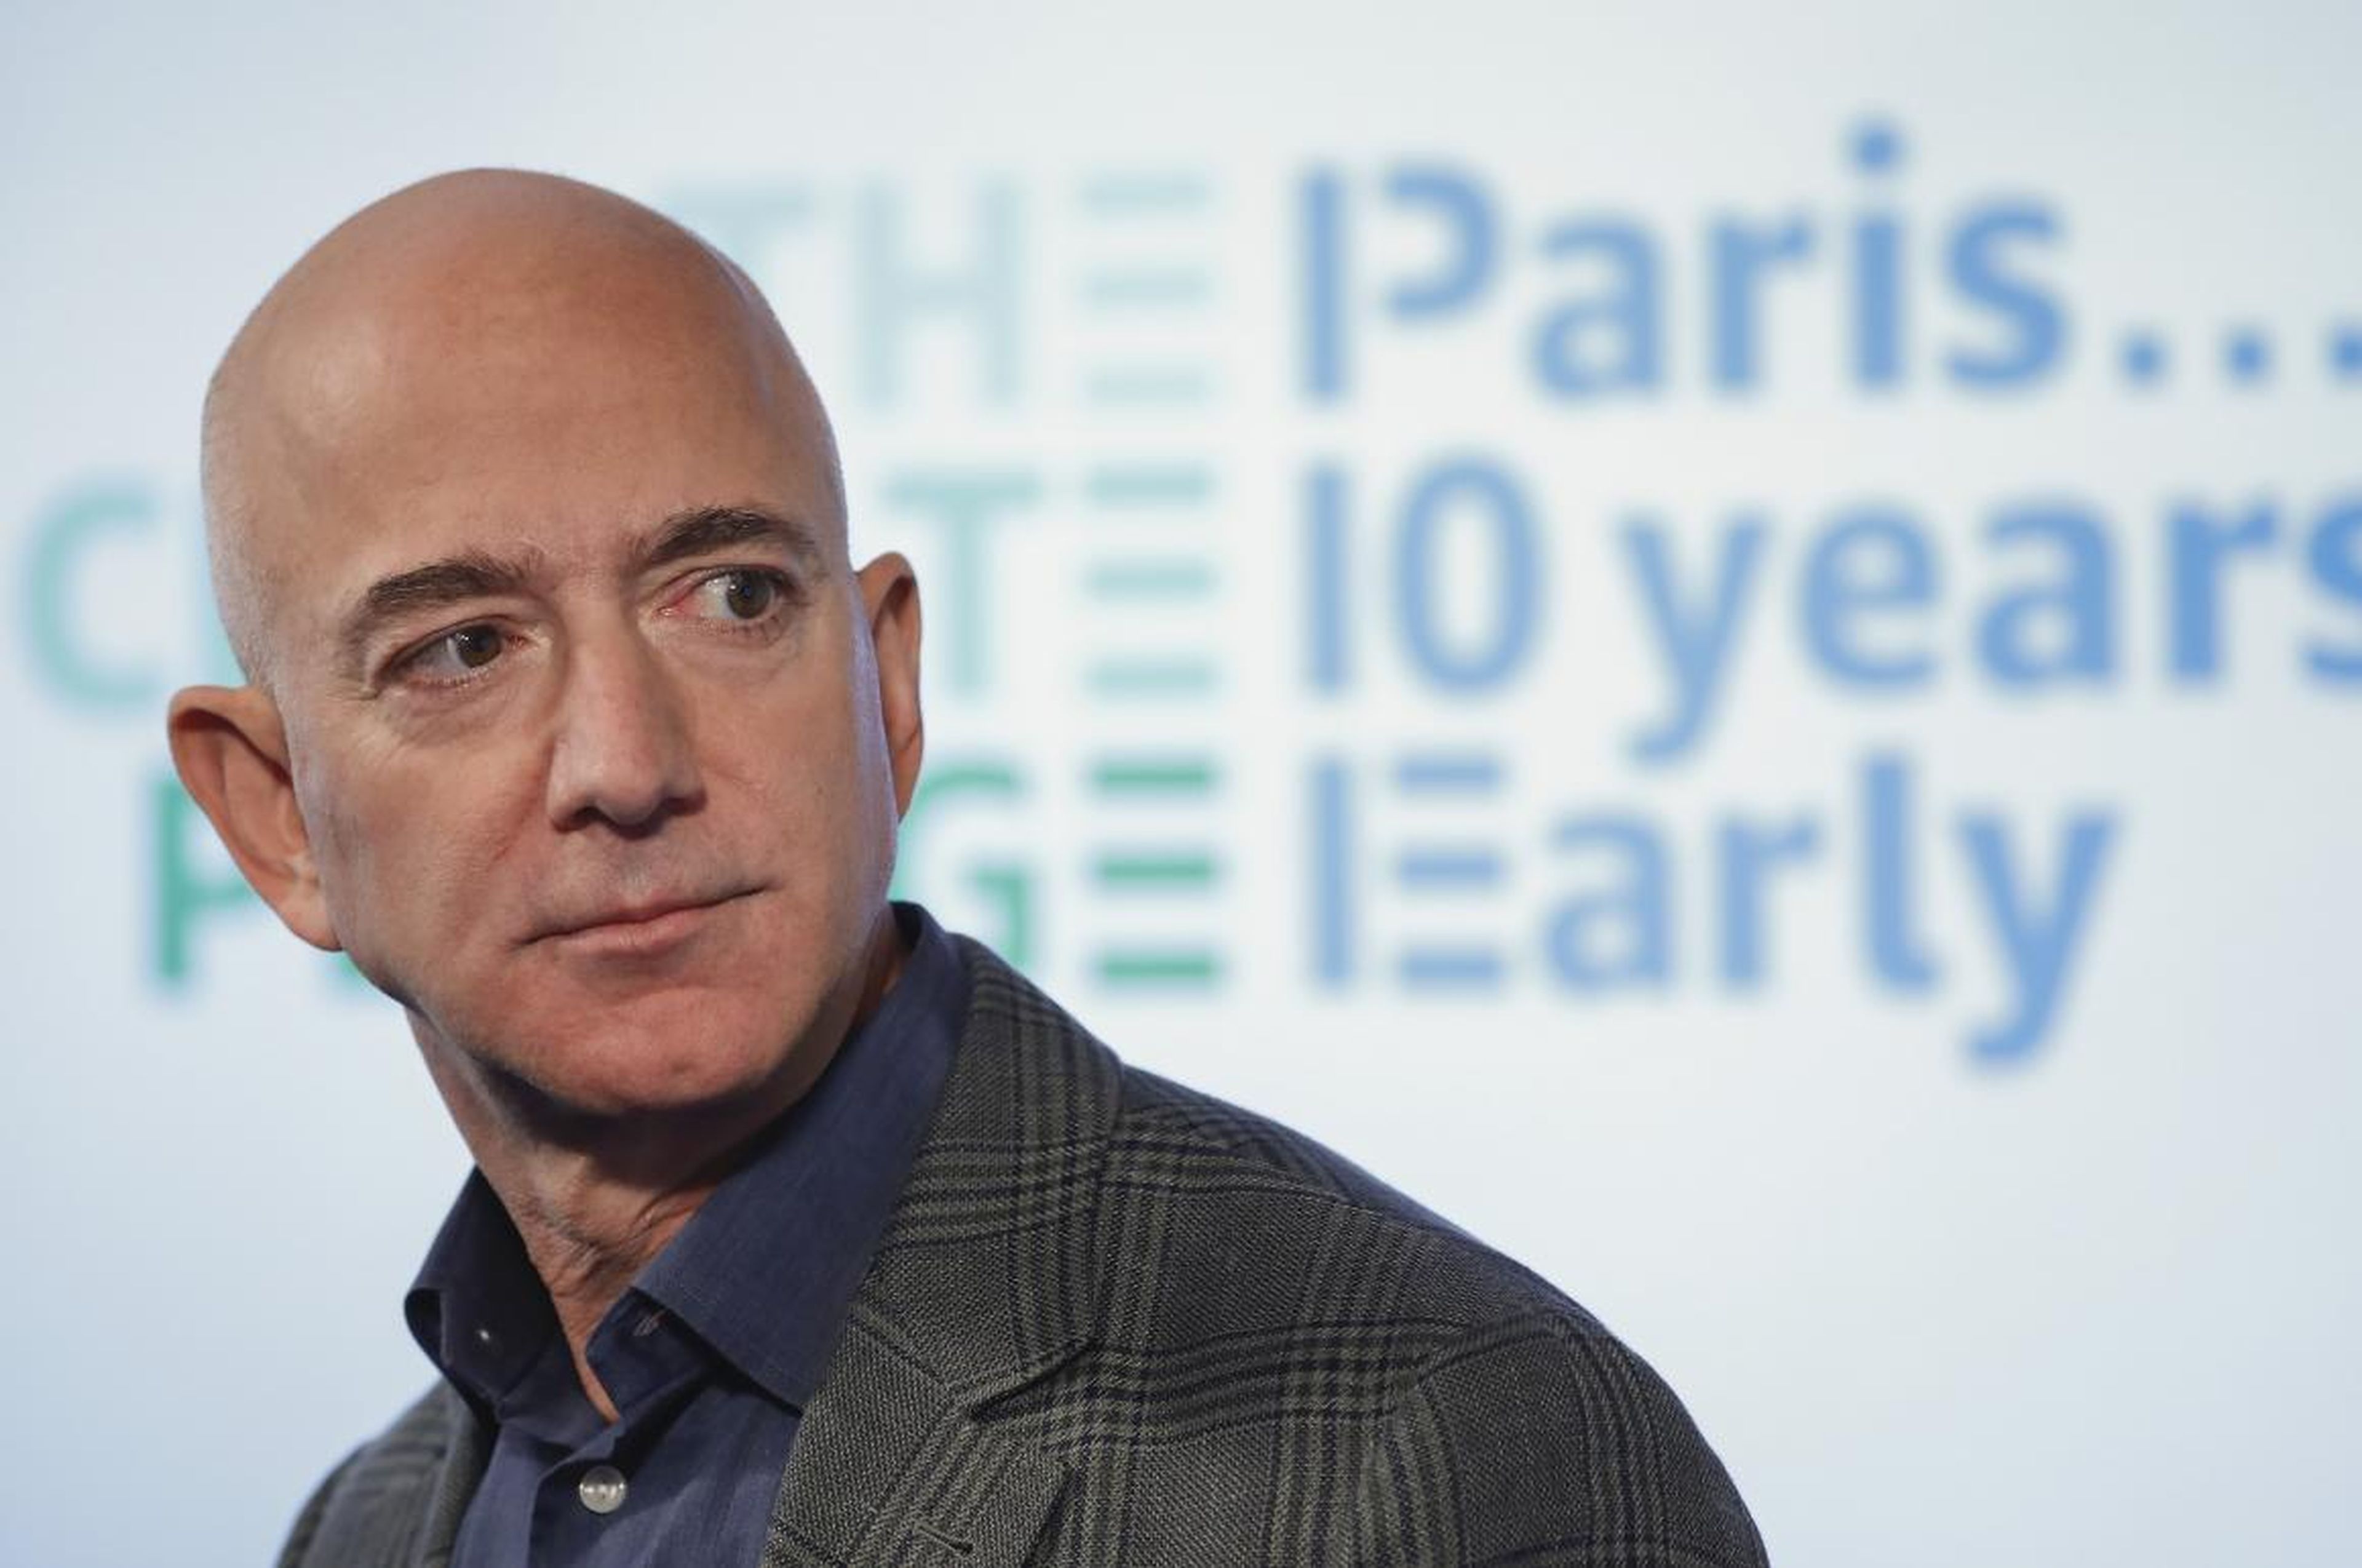 Jeff Bezos threw his weight behind the US military.